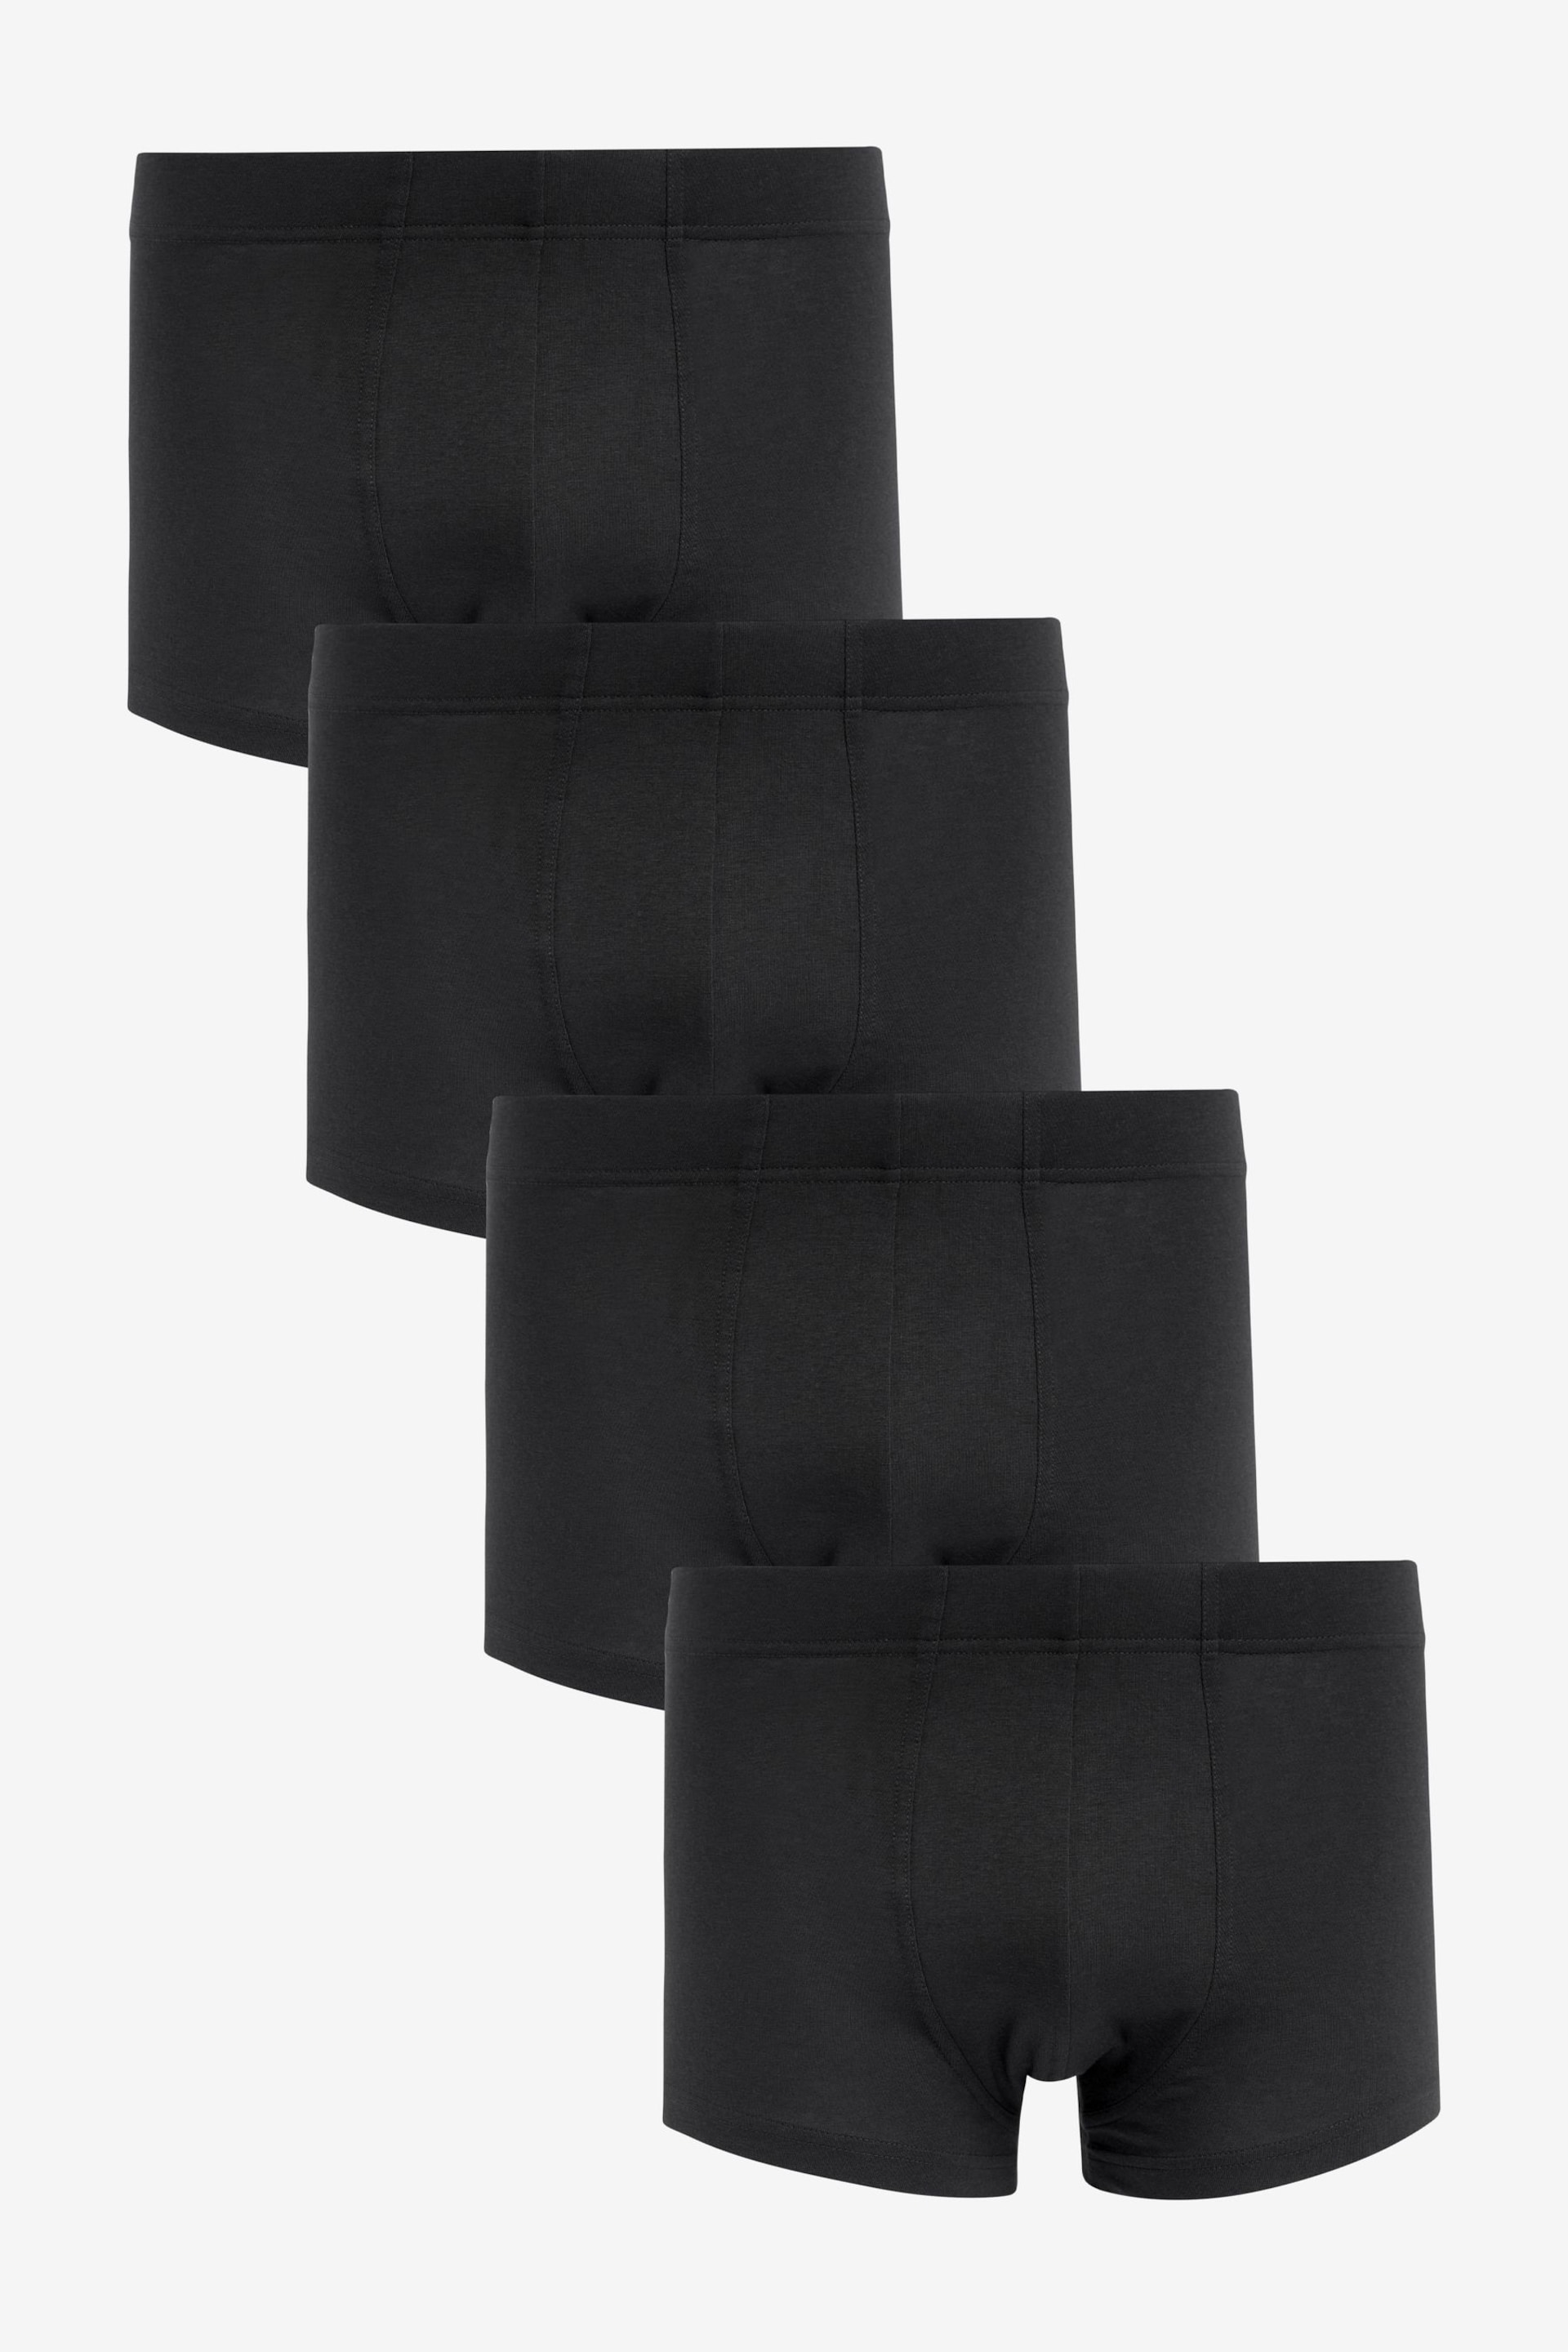 Black 4 pack Essential Hipsters - Image 1 of 3